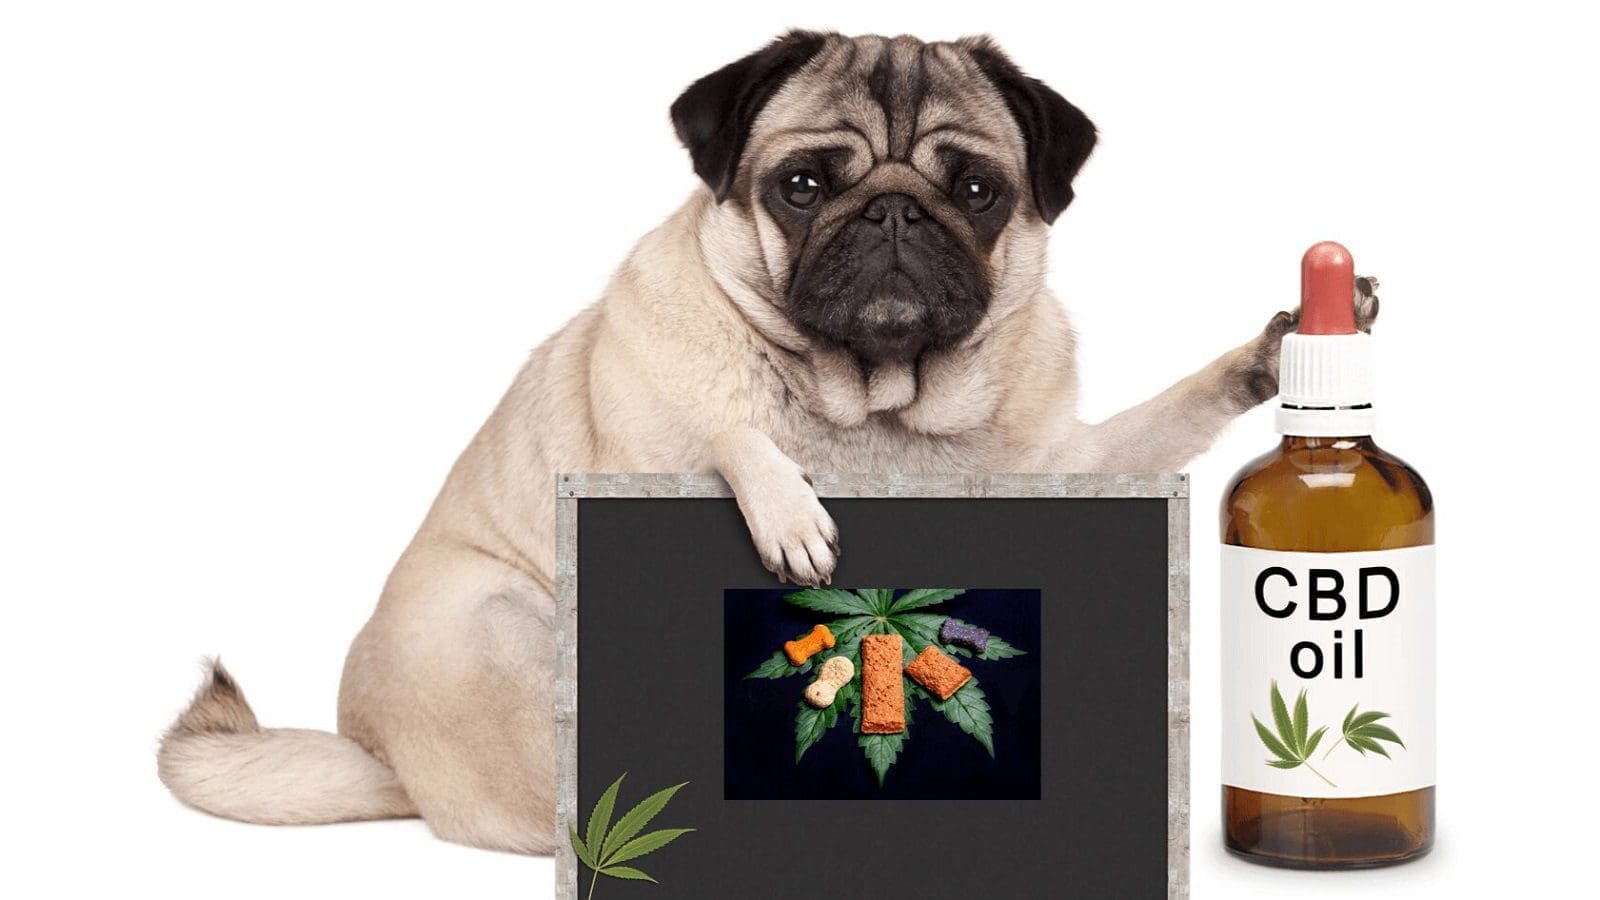 Hong Kong government bans CBD, drives CBD pet products providers out of business